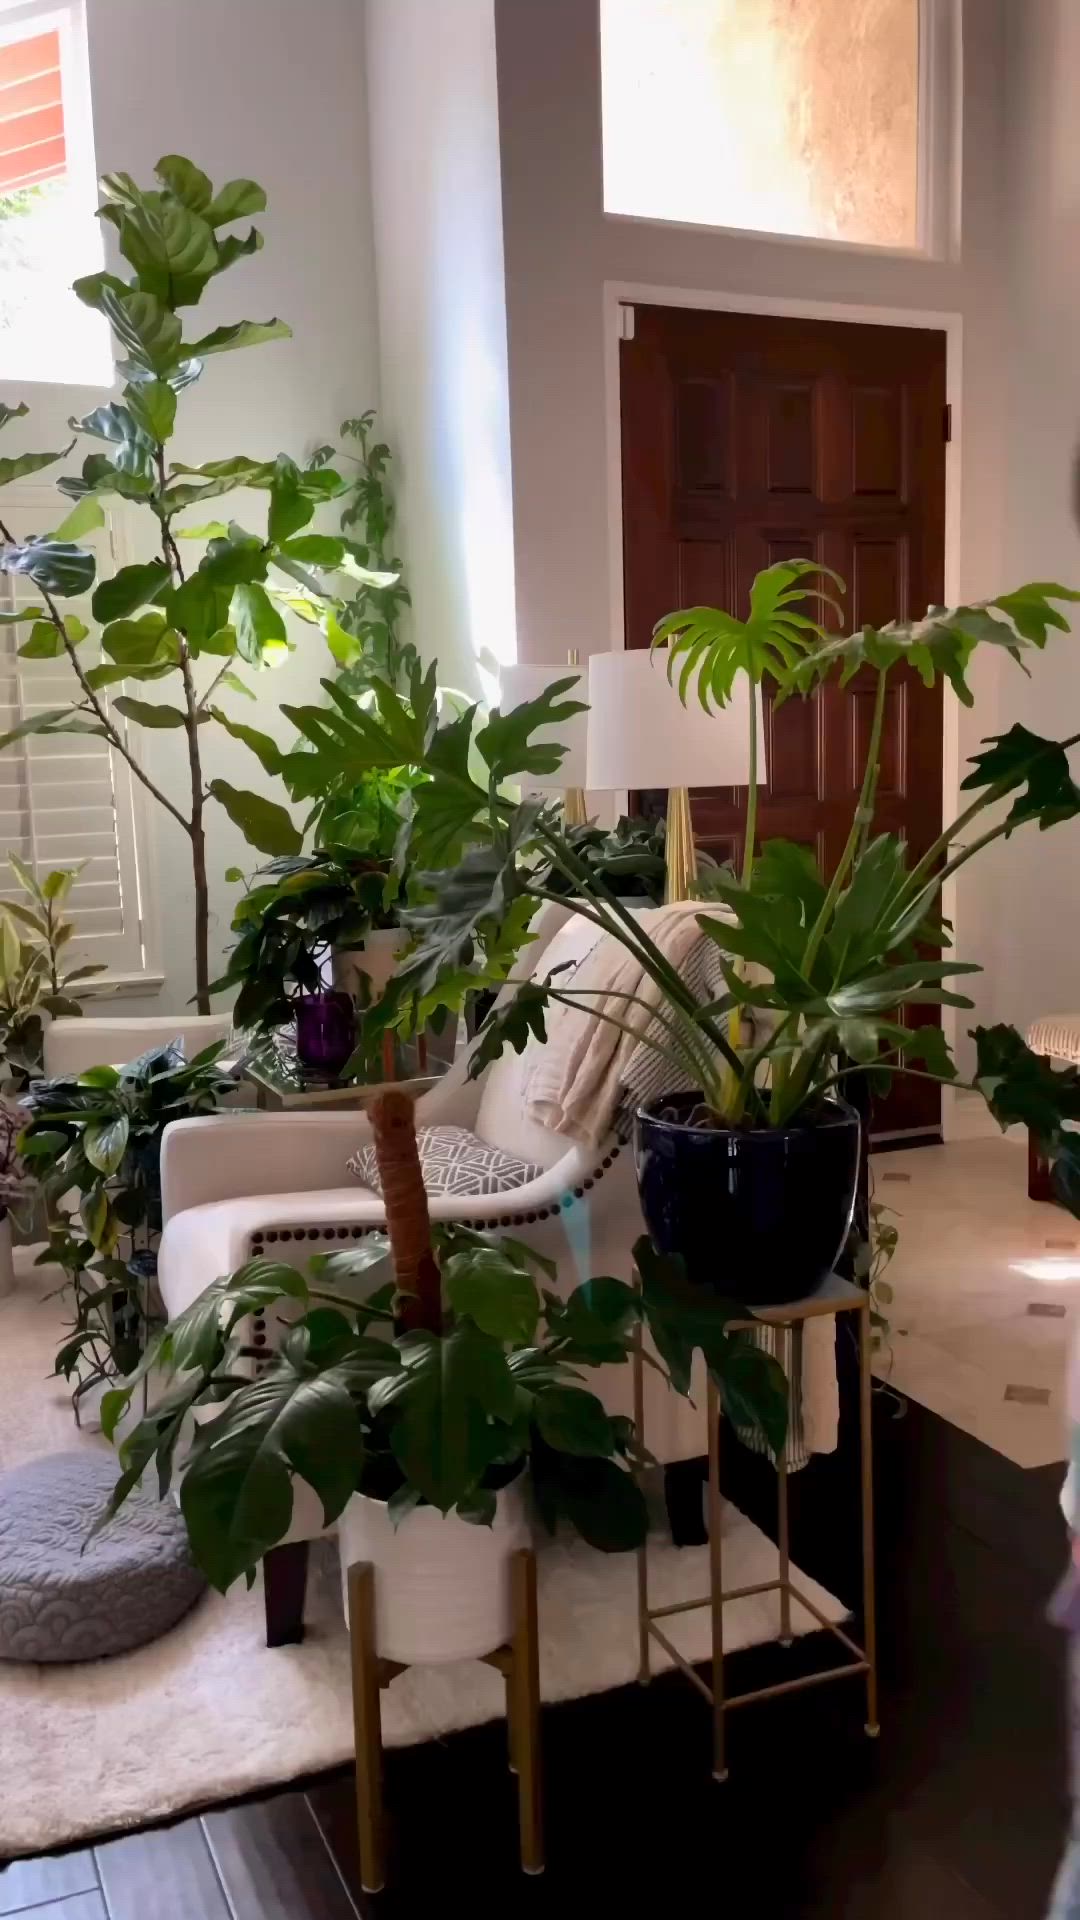 This may contain: a living room filled with lots of green plants